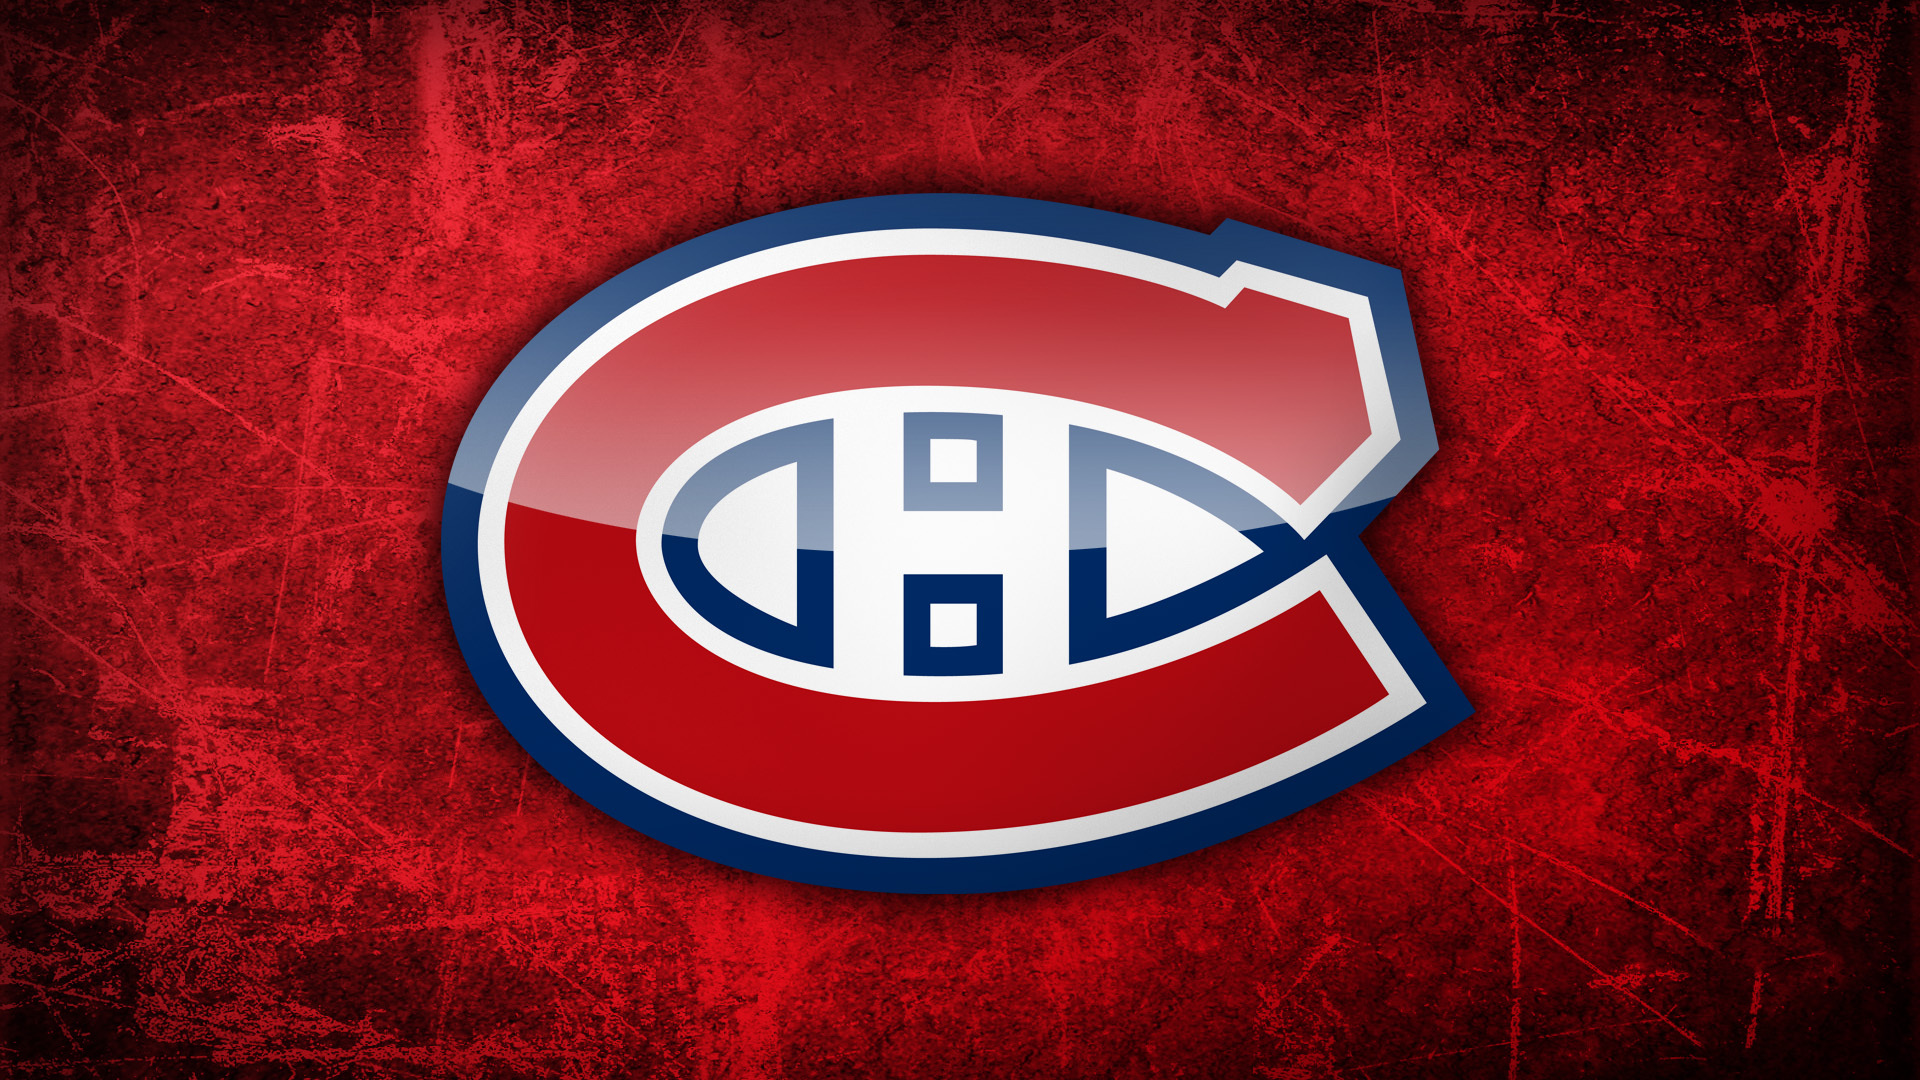 Nhl Montreal Canadiens Hockey Wallpaper Background